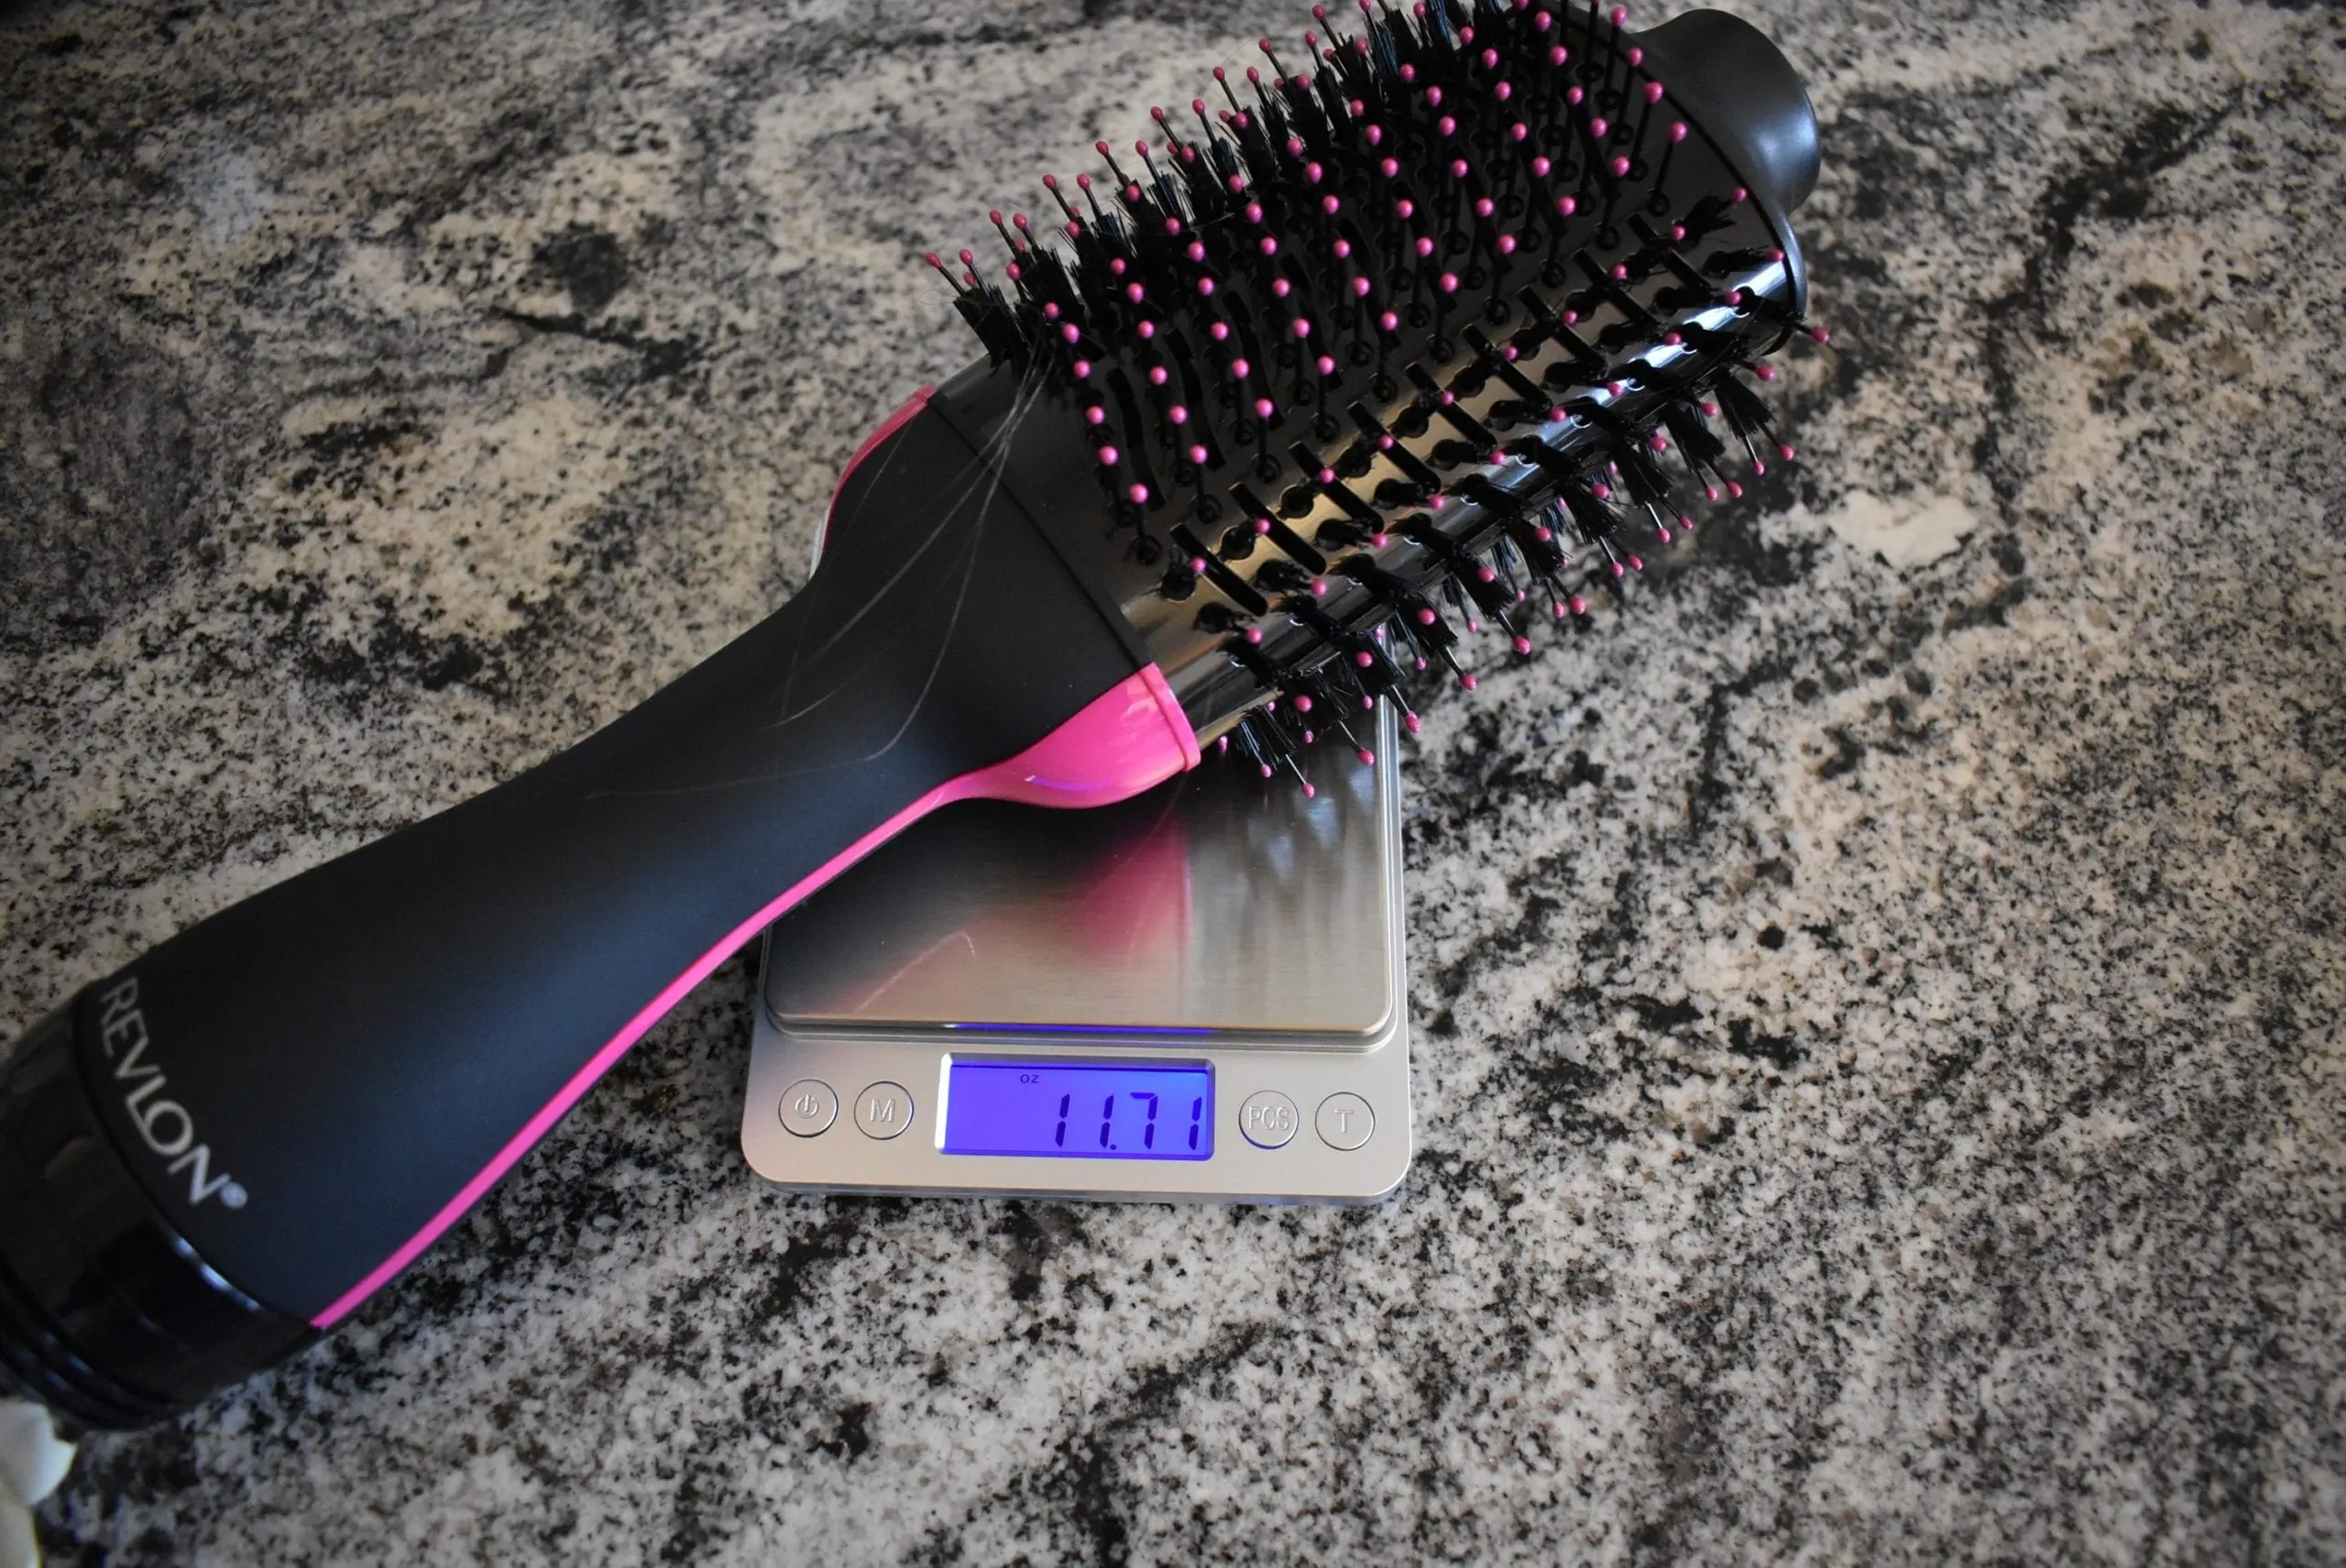 At 11.71 oz, this is one of the lightest units on our best hair dryer list